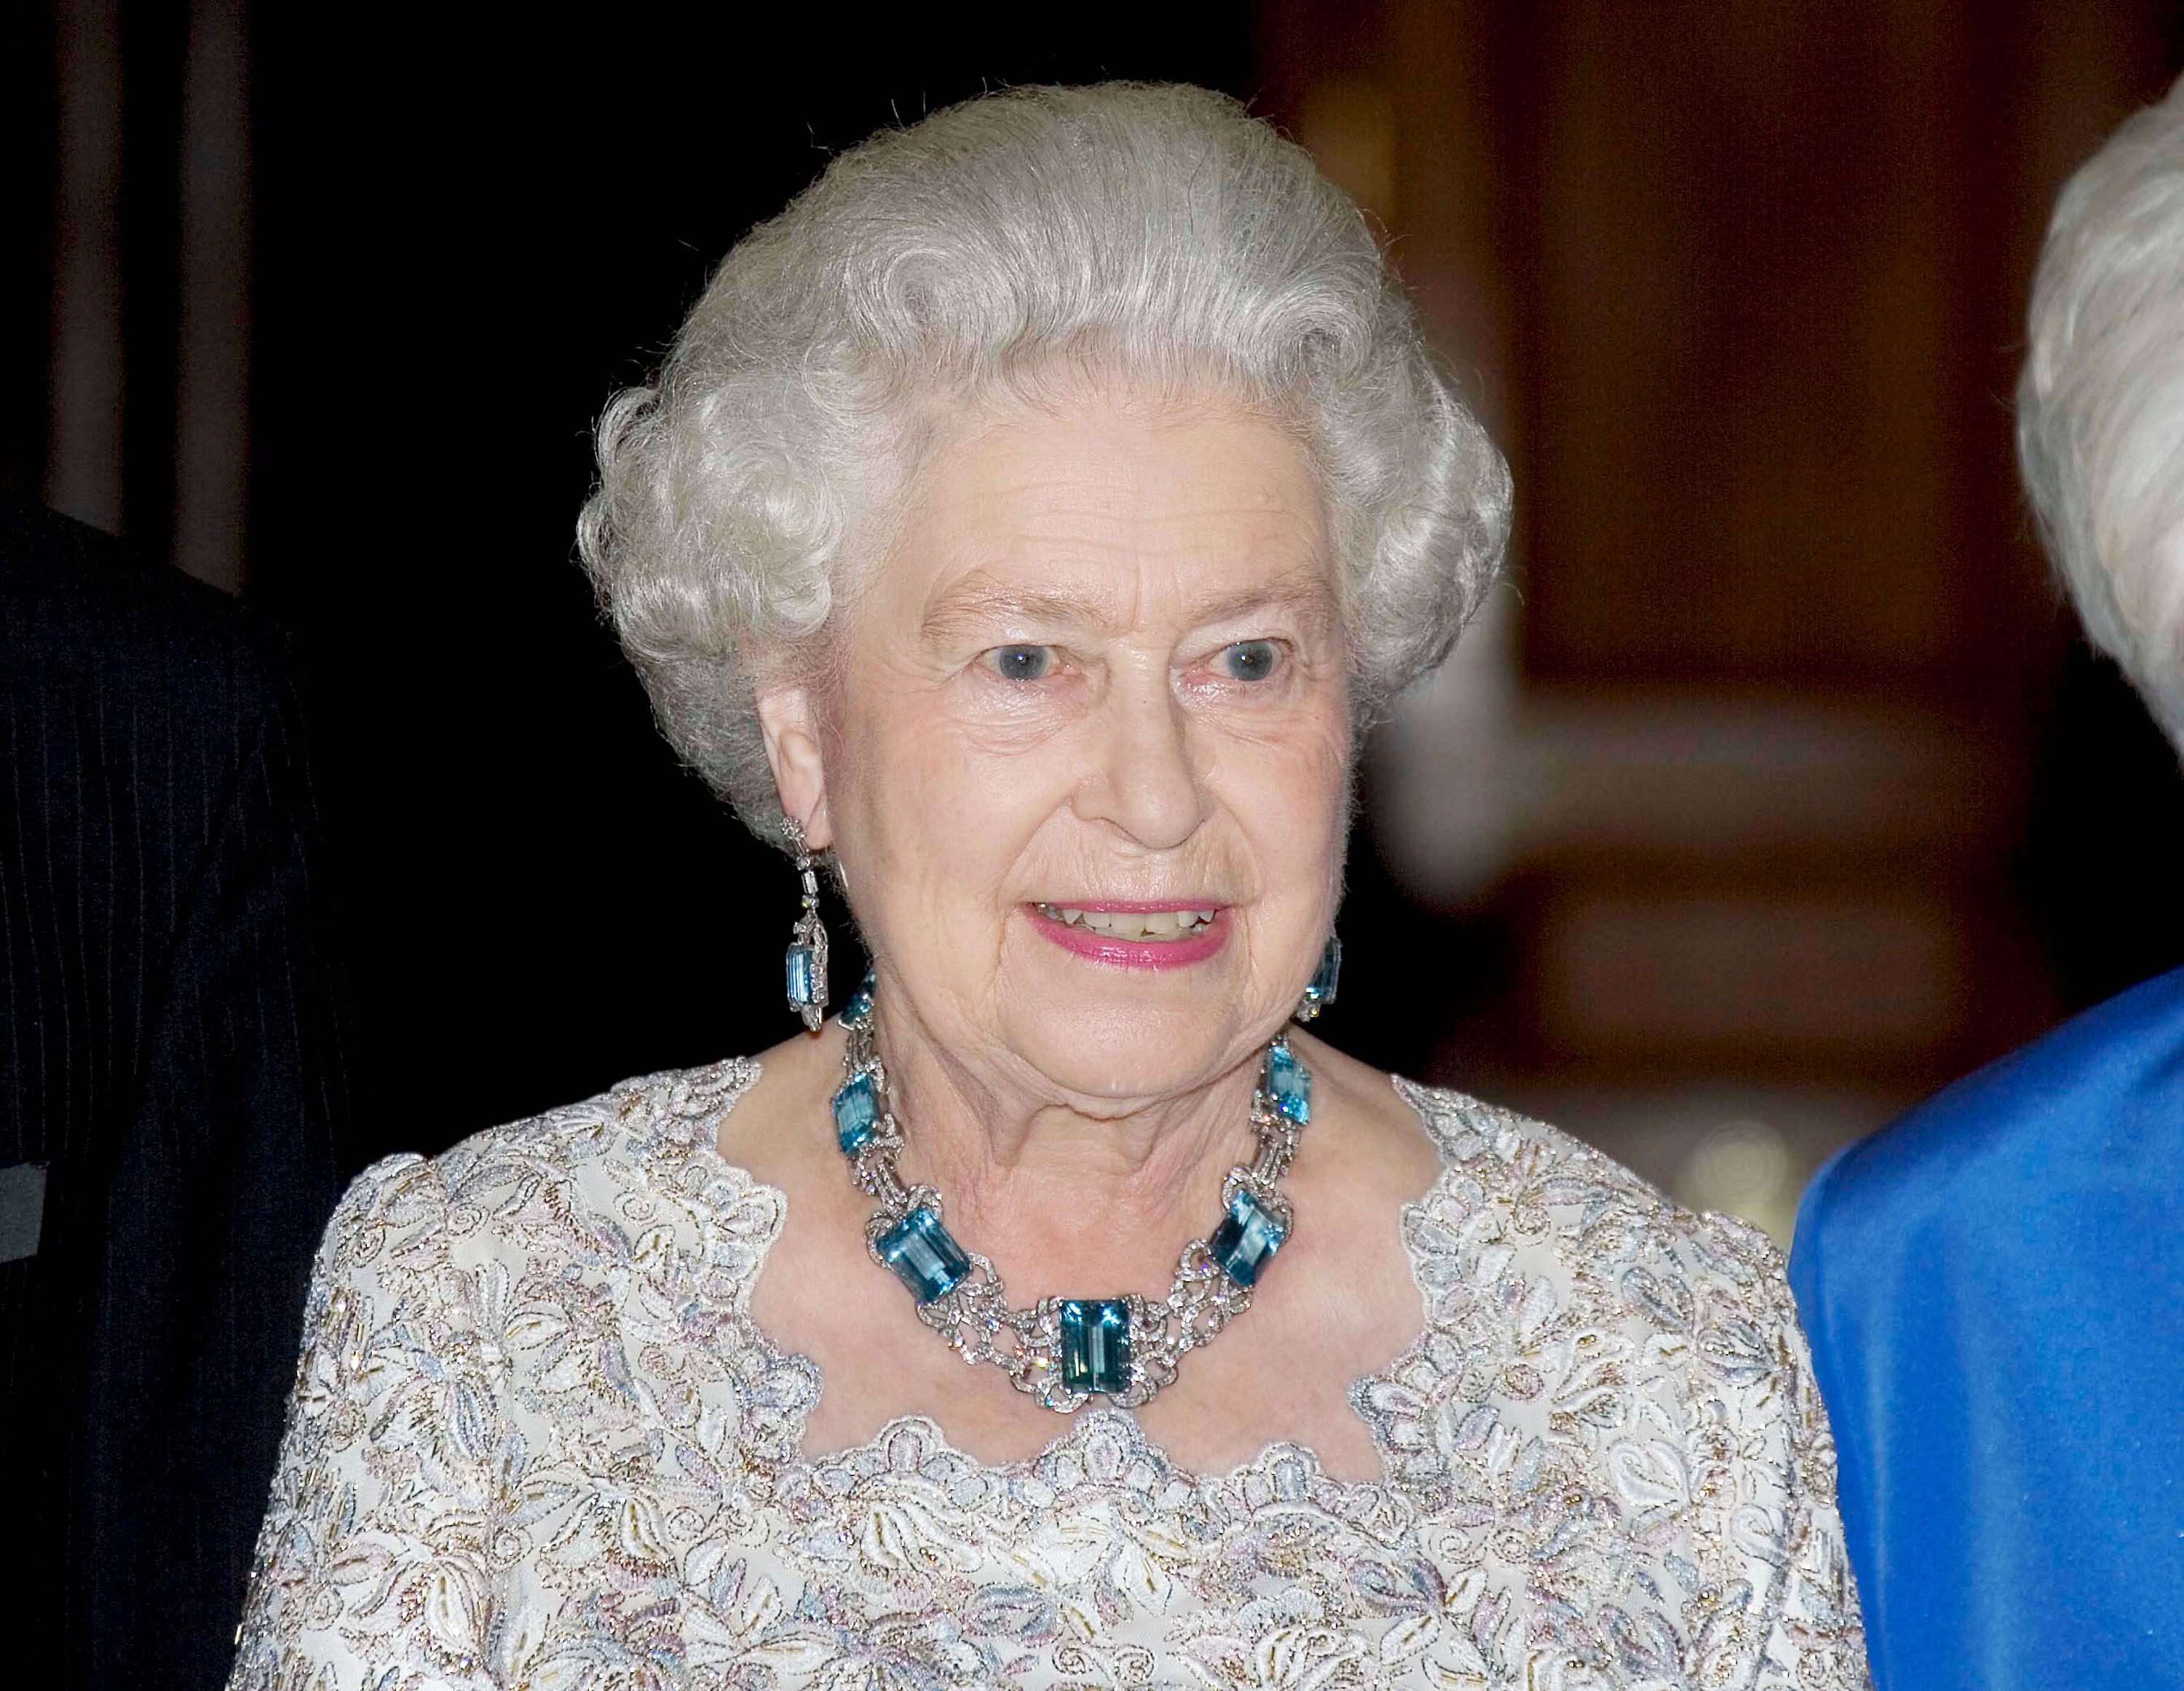 Queen Elizabeth II wearing aquamarine earrings and necklace to dinner party